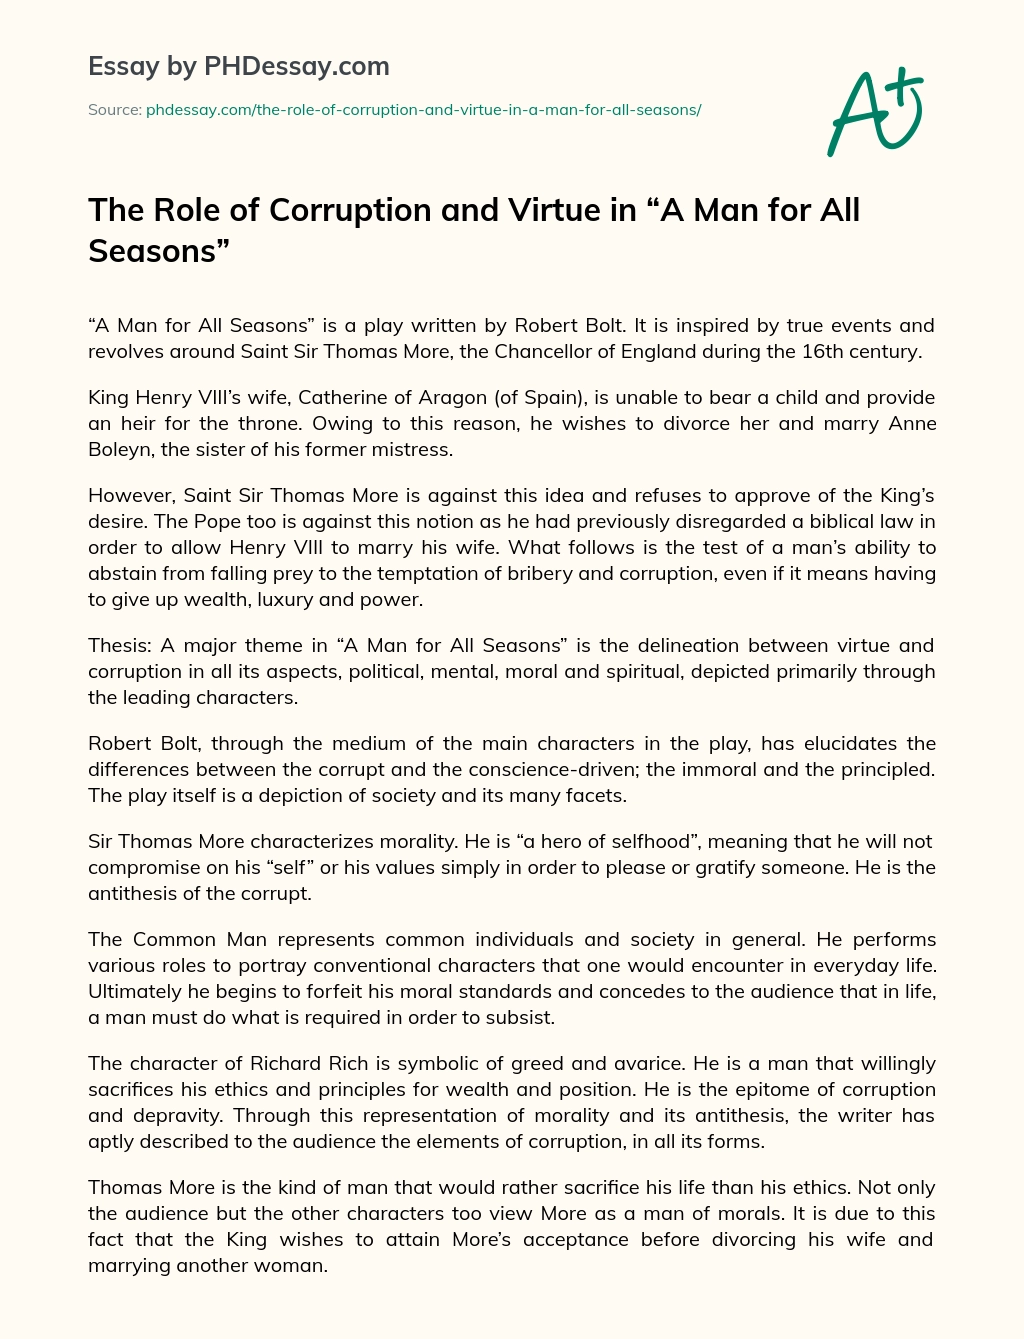 The Role of Corruption and Virtue in “A Man for All Seasons” essay